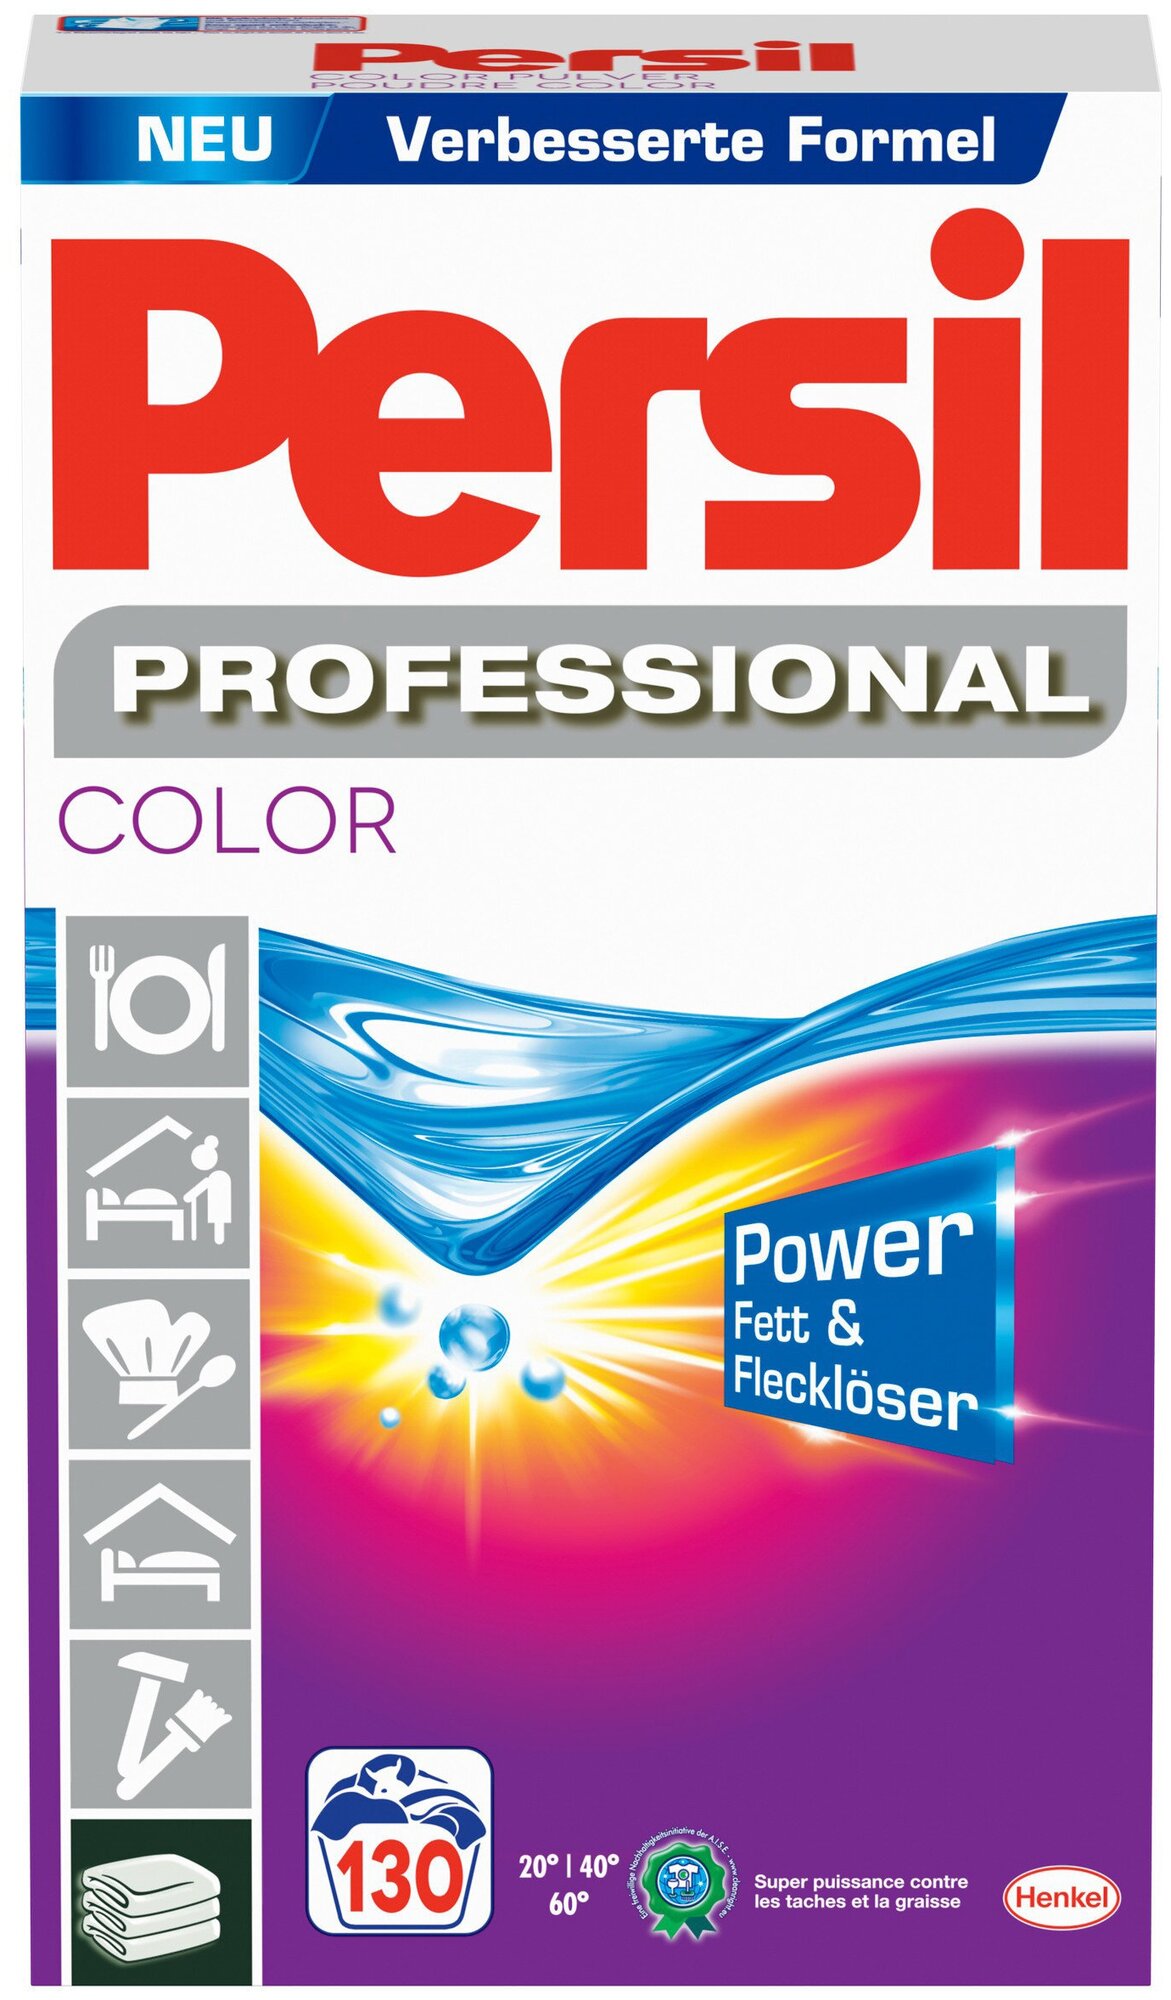   / Persil Professional Color 130  -      8,45 